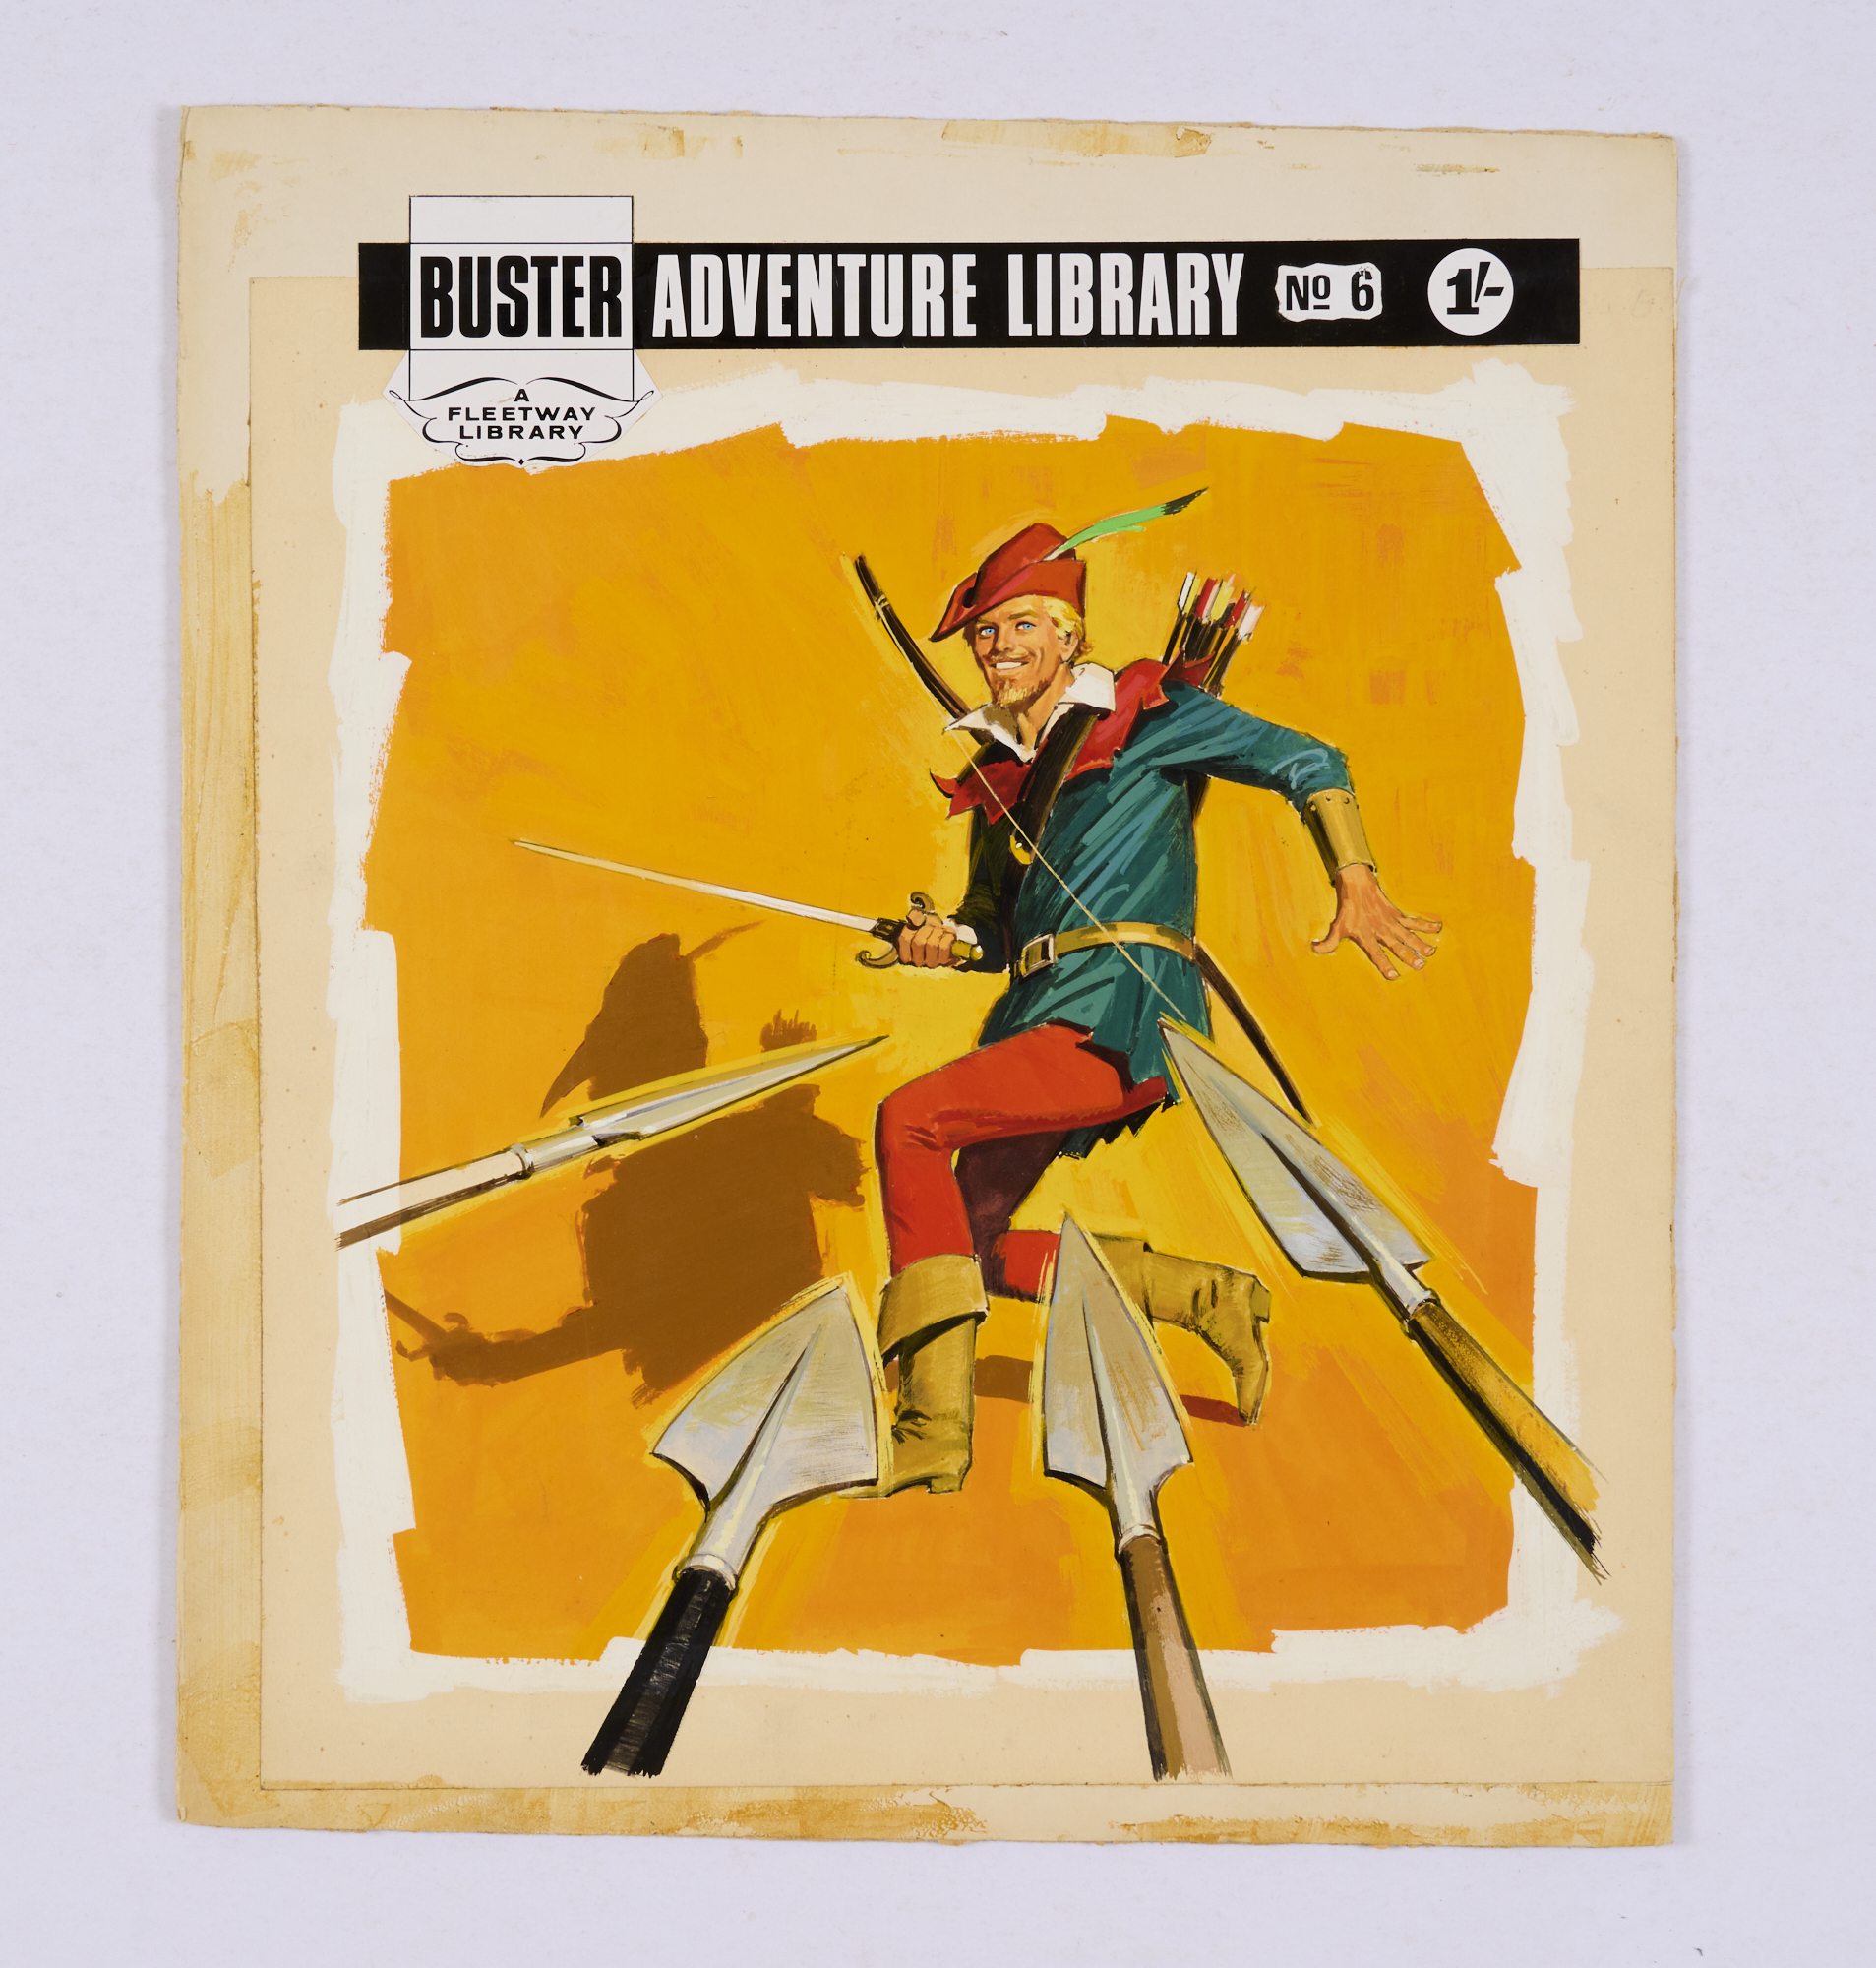 Buster Adventure Library No 6 original 'Robin Hood at Bay' cover artwork (1967). Artist unknown.